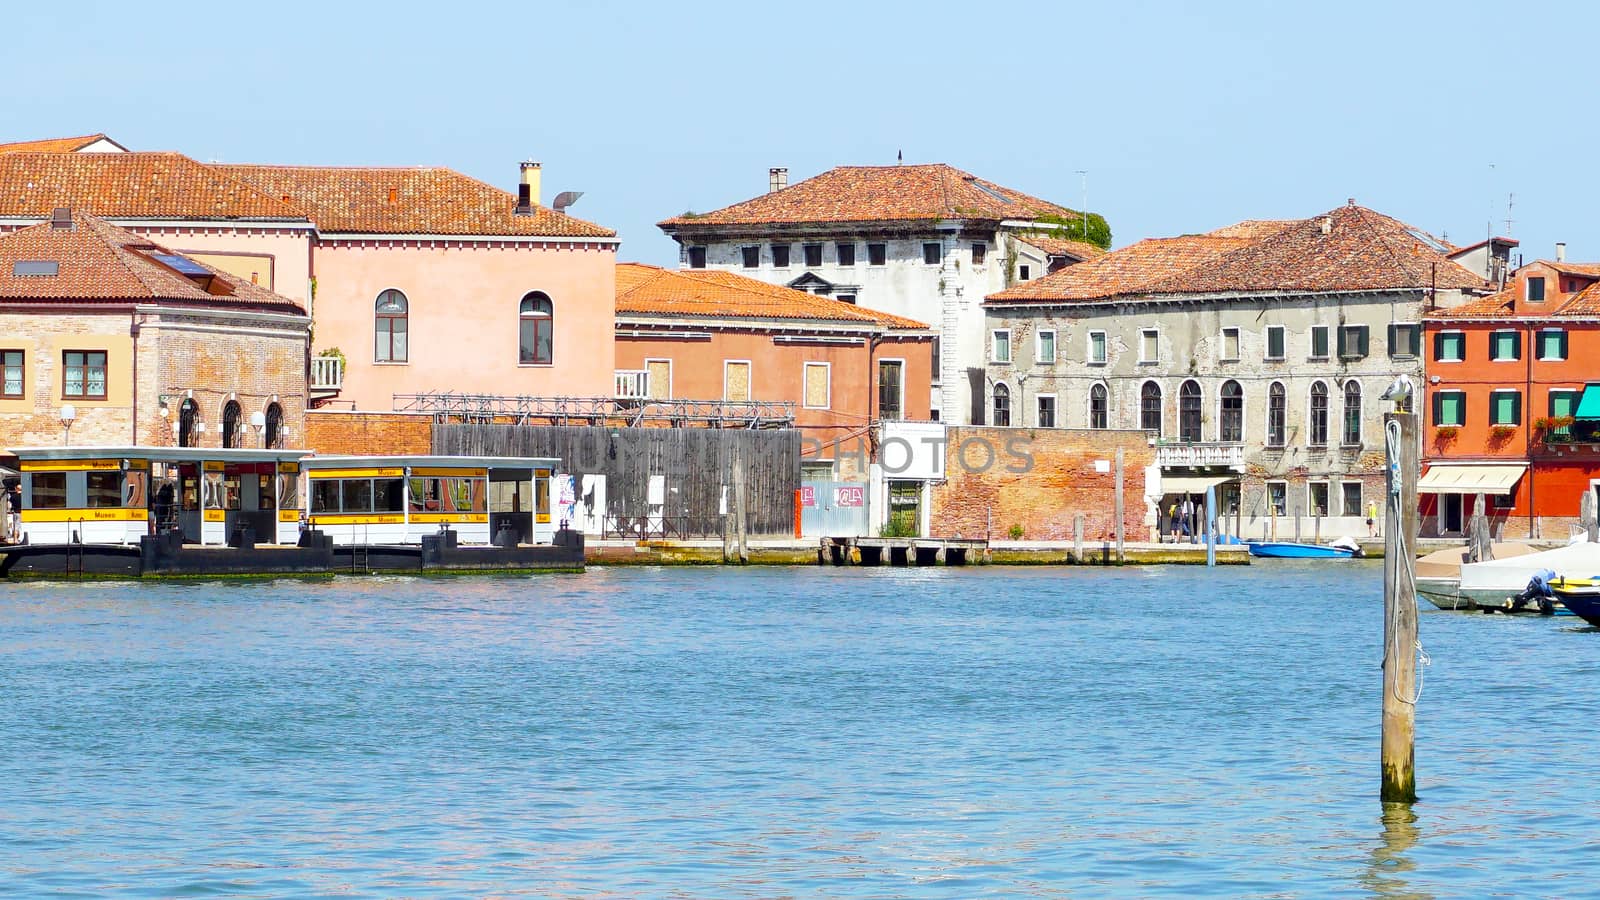 view of building architecture in Murano and river, Venice, Italy